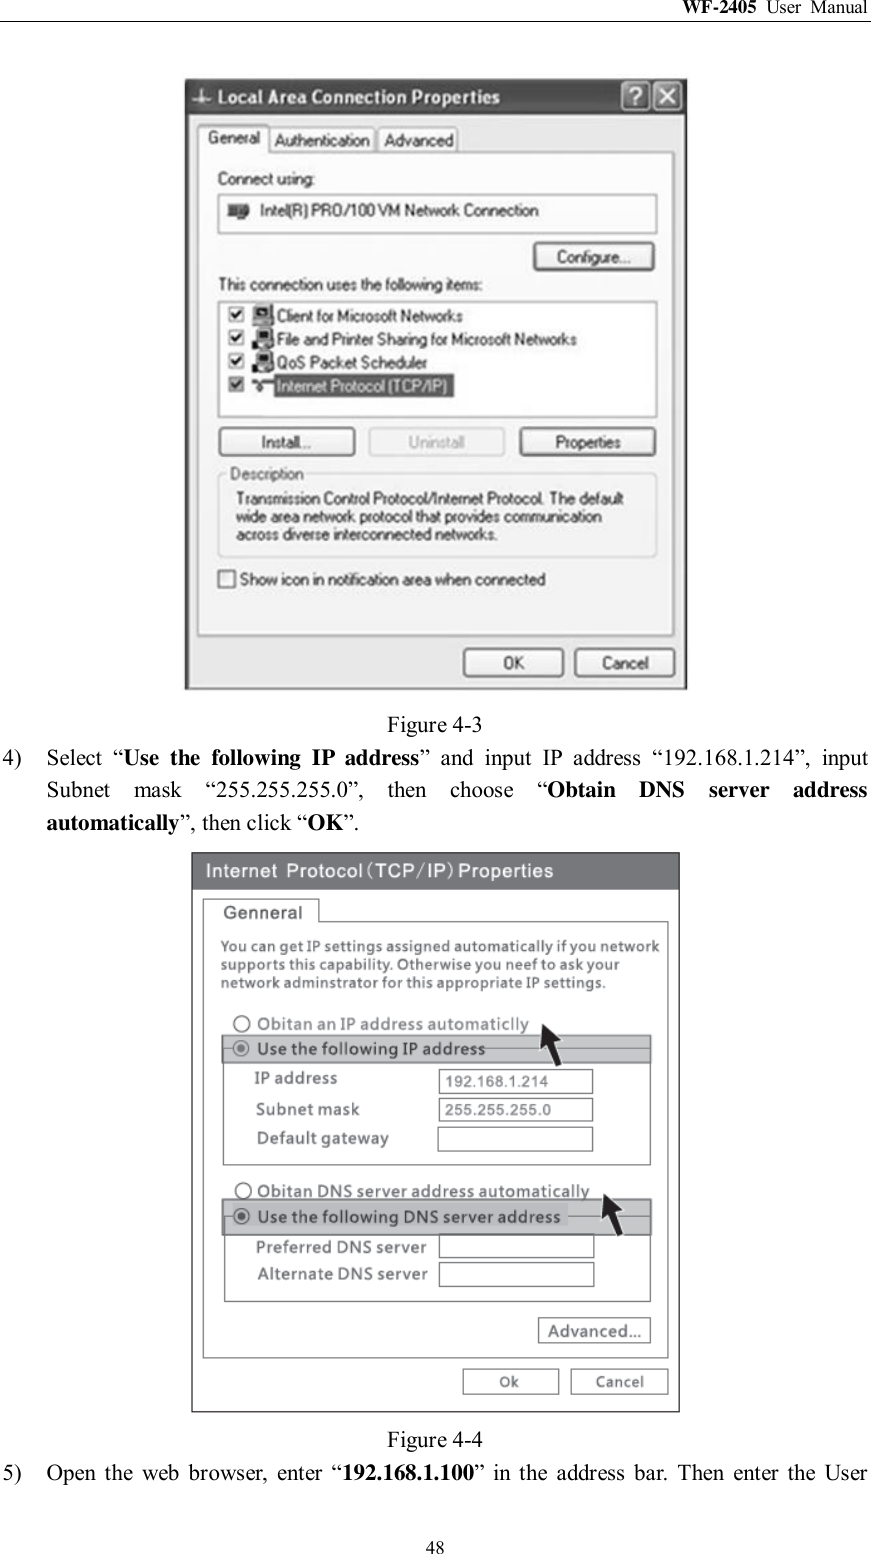 WF-2405  User  Manual  48  Figure 4-3 4) Select  “Use  the  following  IP  address”  and  input  IP  address  “192.168.1.214”,  input Subnet  mask  “255.255.255.0”,  then  choose  “Obtain  DNS  server  address automatically”, then click “OK”.  Figure 4-4 5) Open  the  web  browser,  enter  “192.168.1.100”  in  the  address  bar.  Then  enter  the  User 